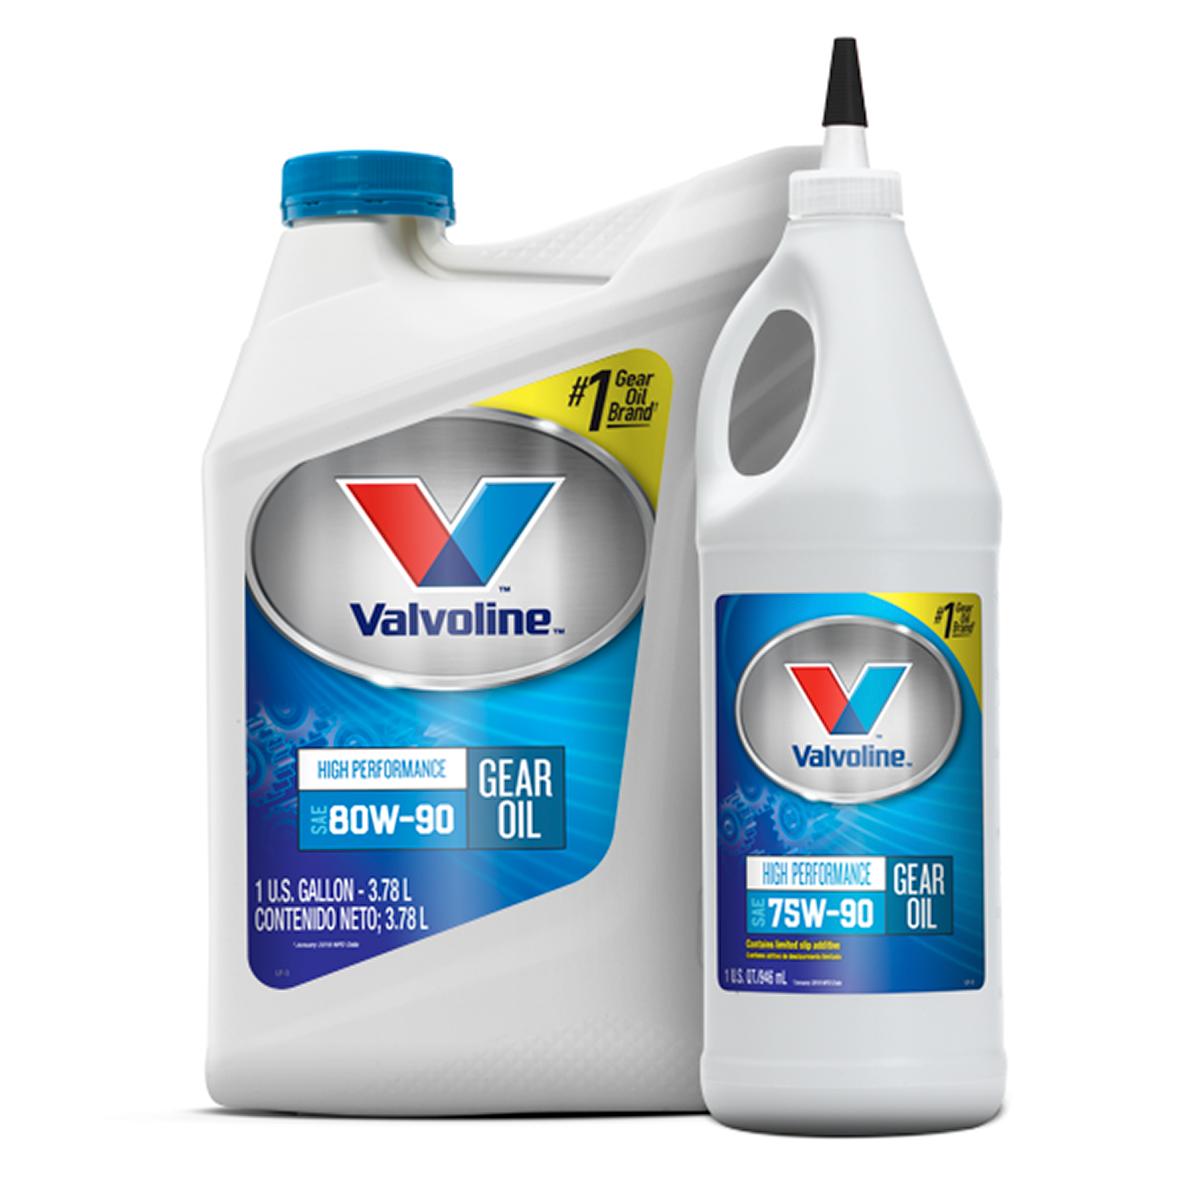 https://www.valvolineglobal.com/496433/globalassets/dtc/gear-oil/high-performance/us_dtc_conventional_1gal.png